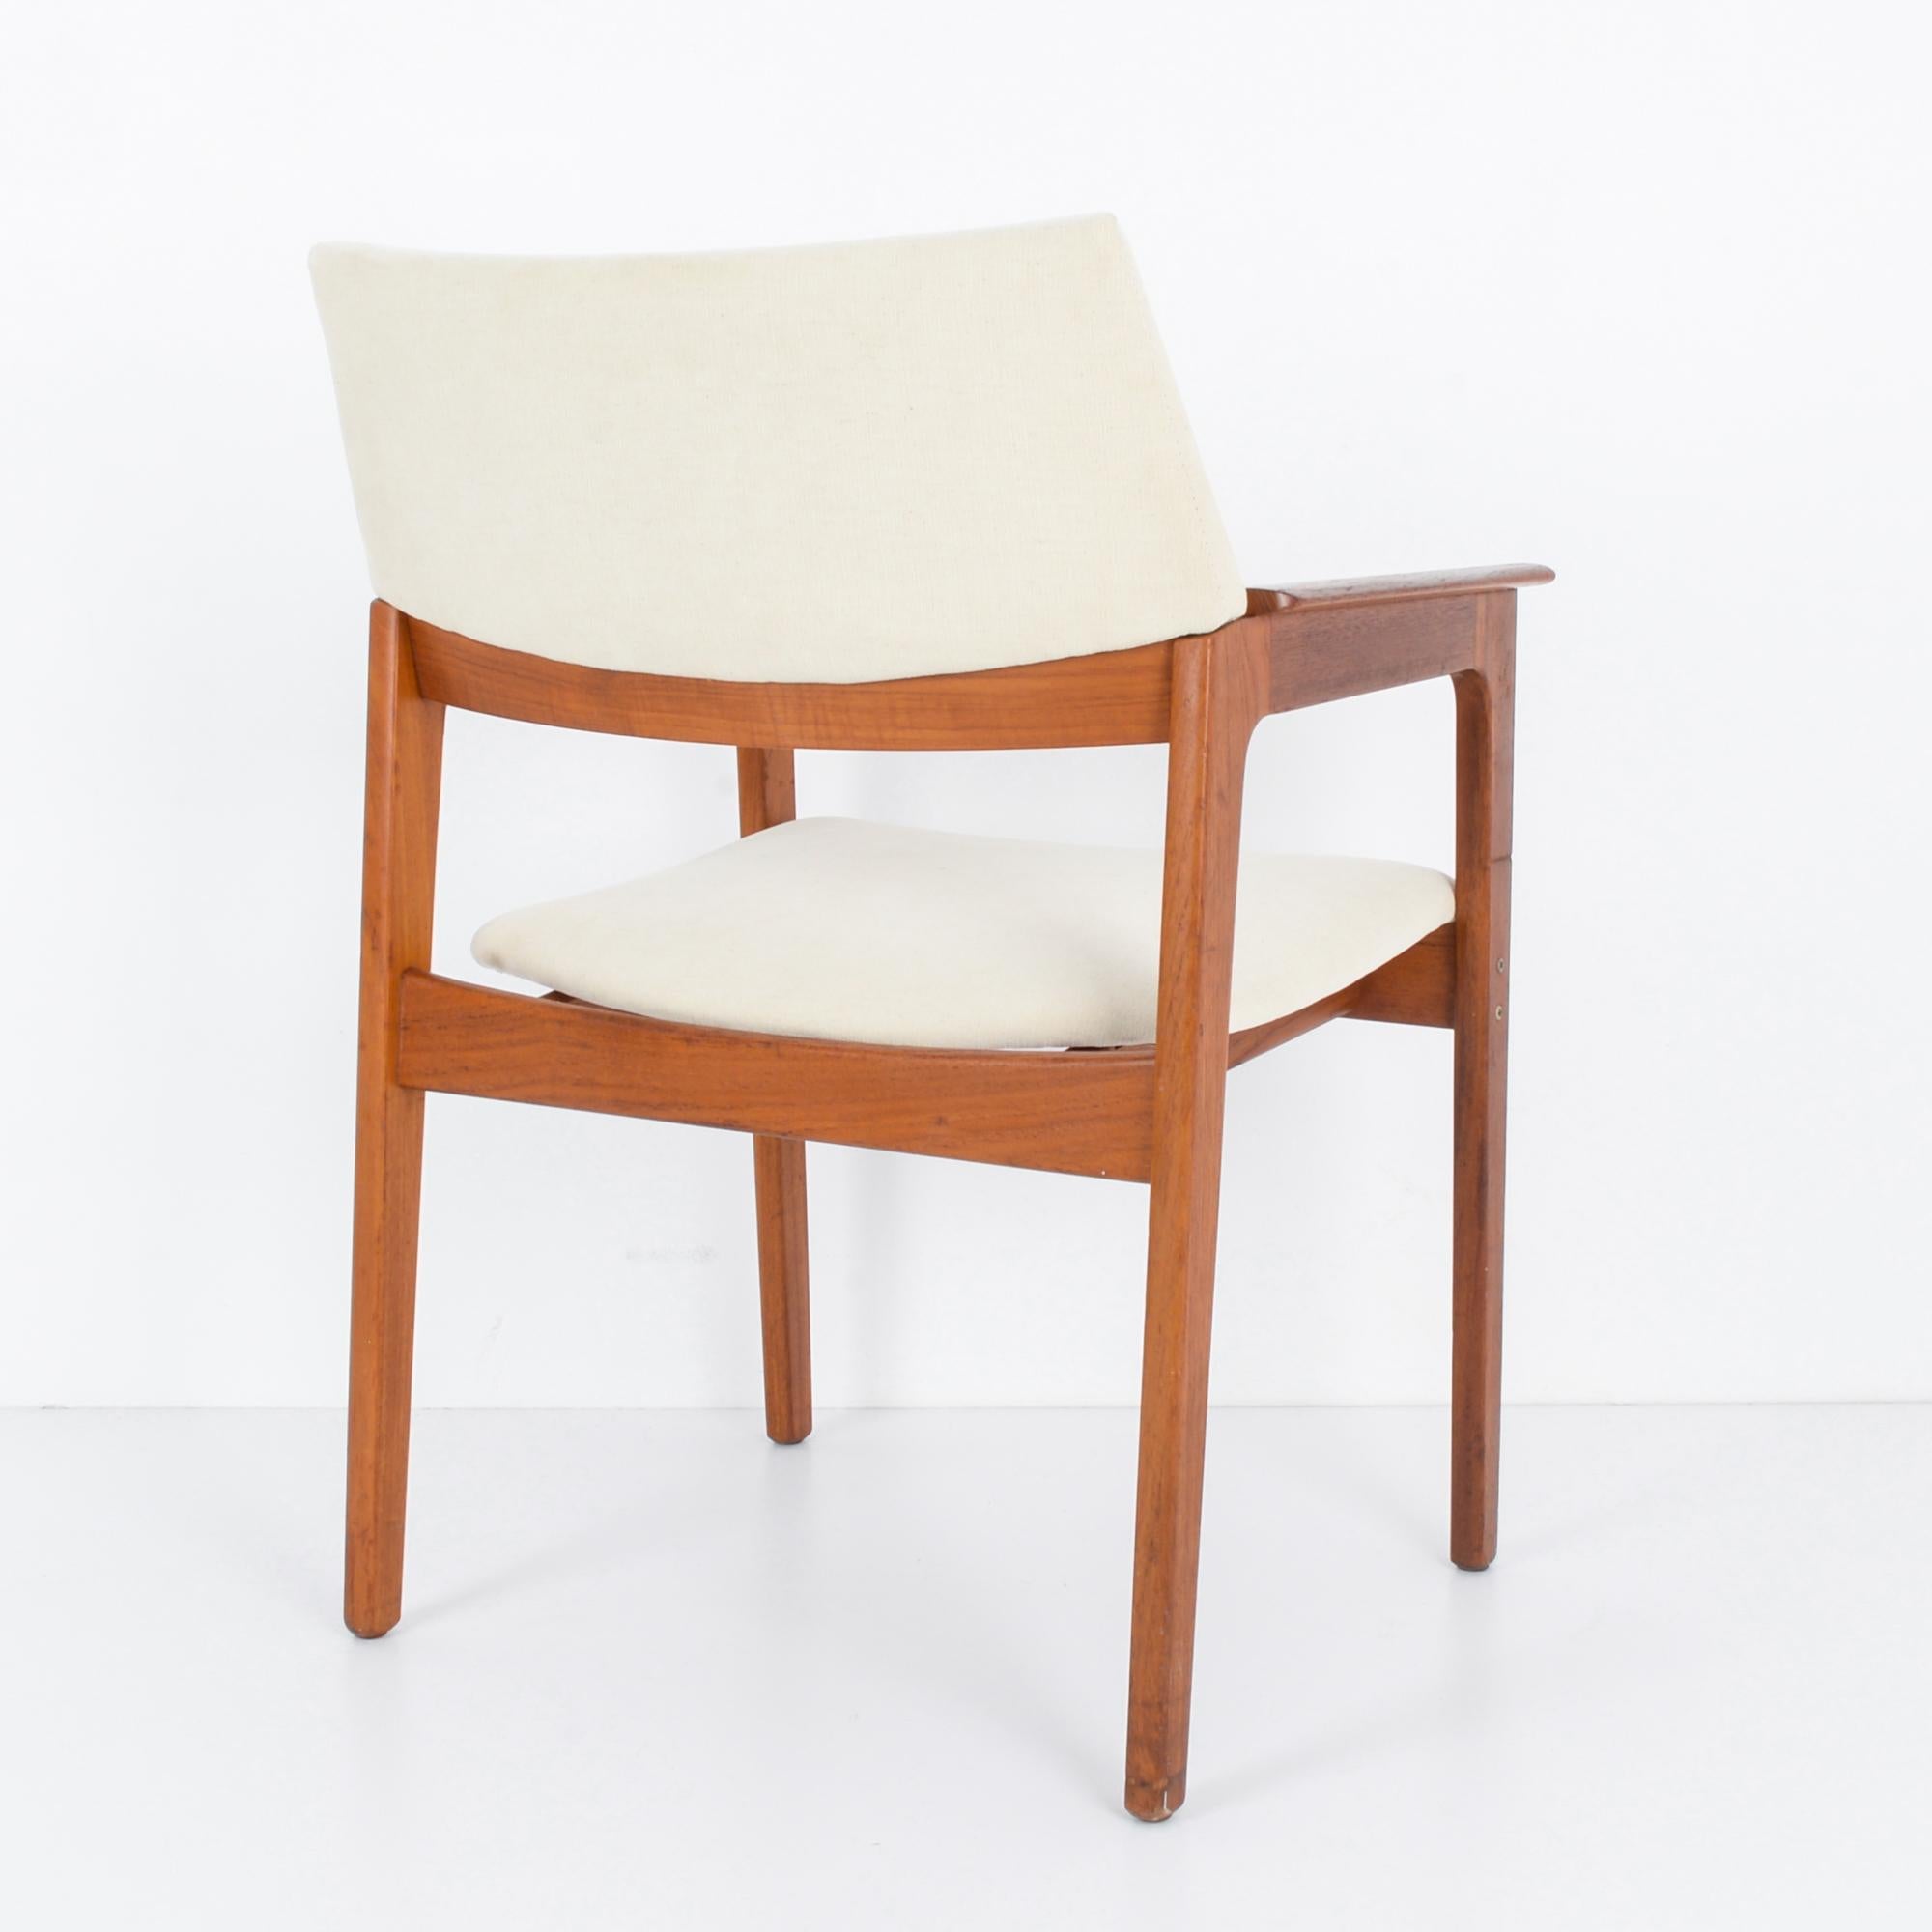 20th Century 1960s Danish Wooden Armchair with Upholstered Seat and Back For Sale